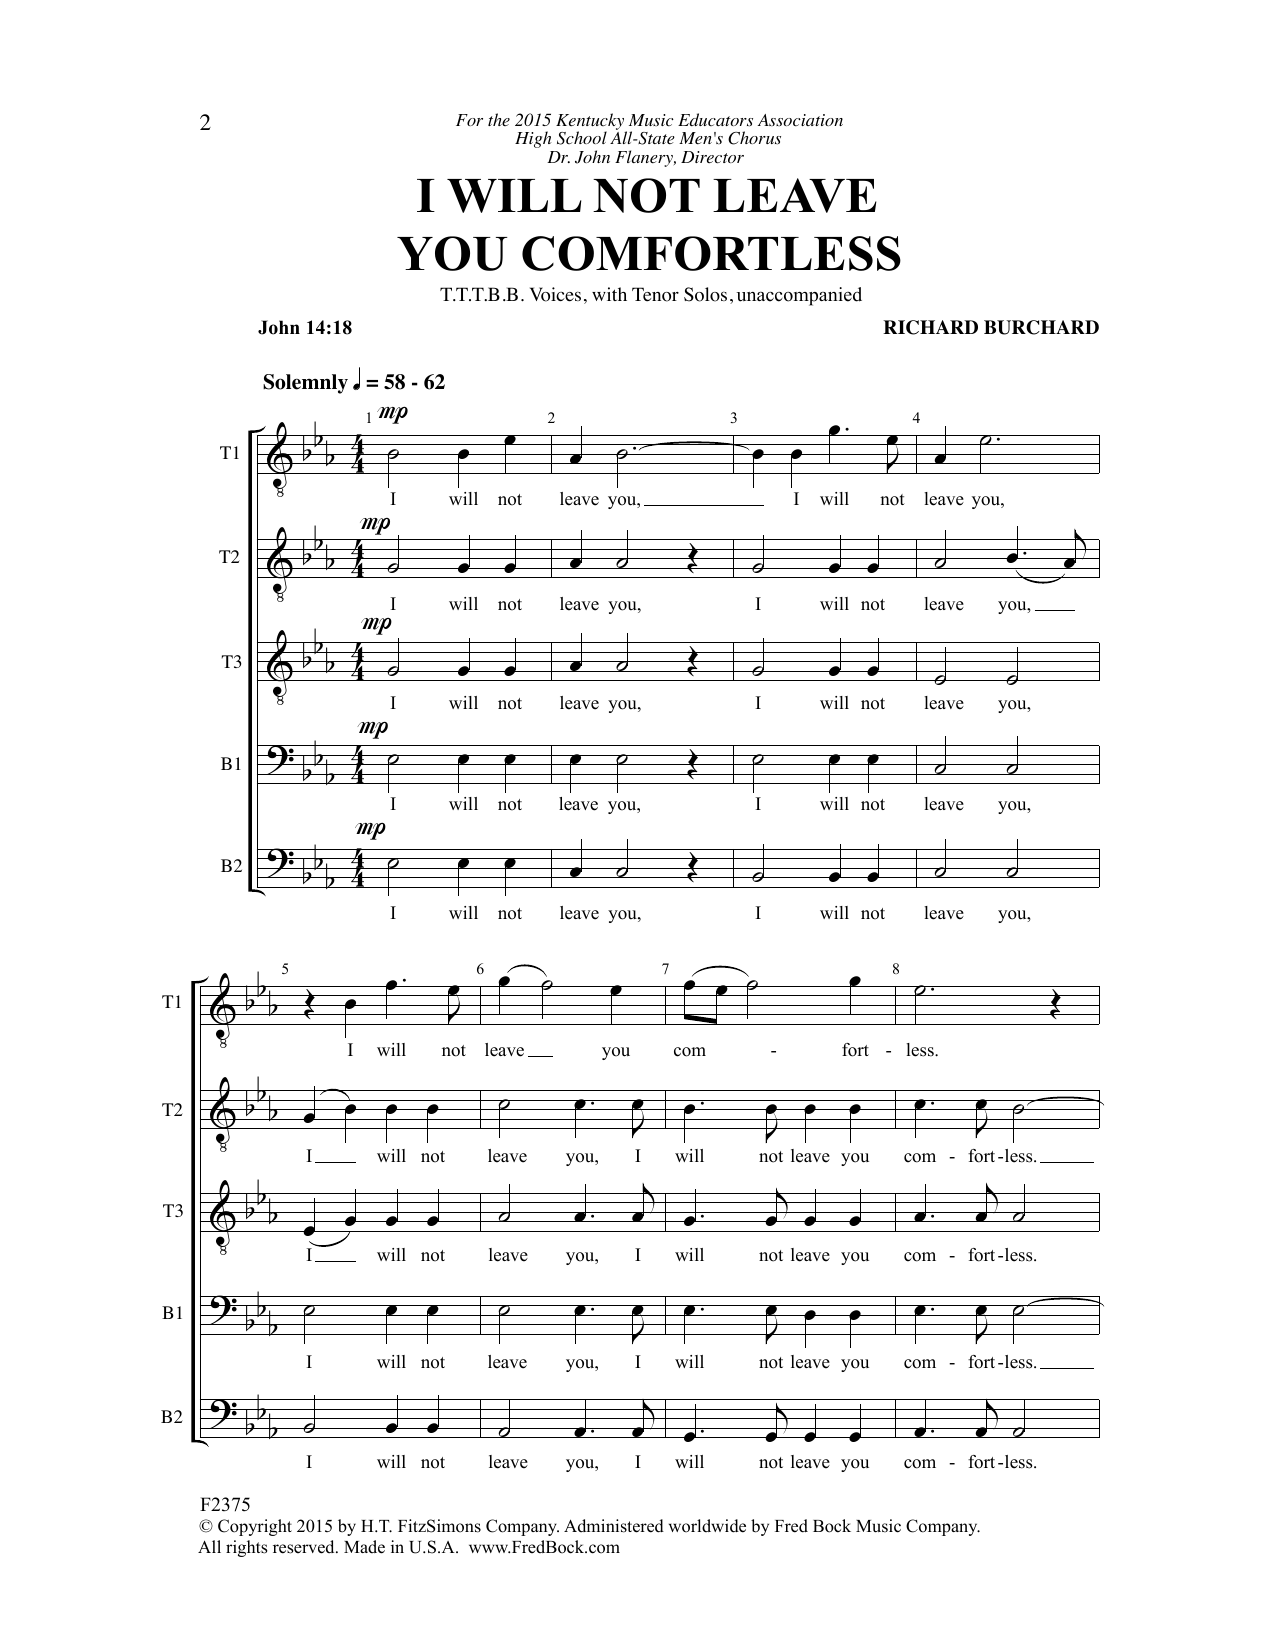 Download Richard Burchard I Will Not Leave You Comfortless Sheet Music